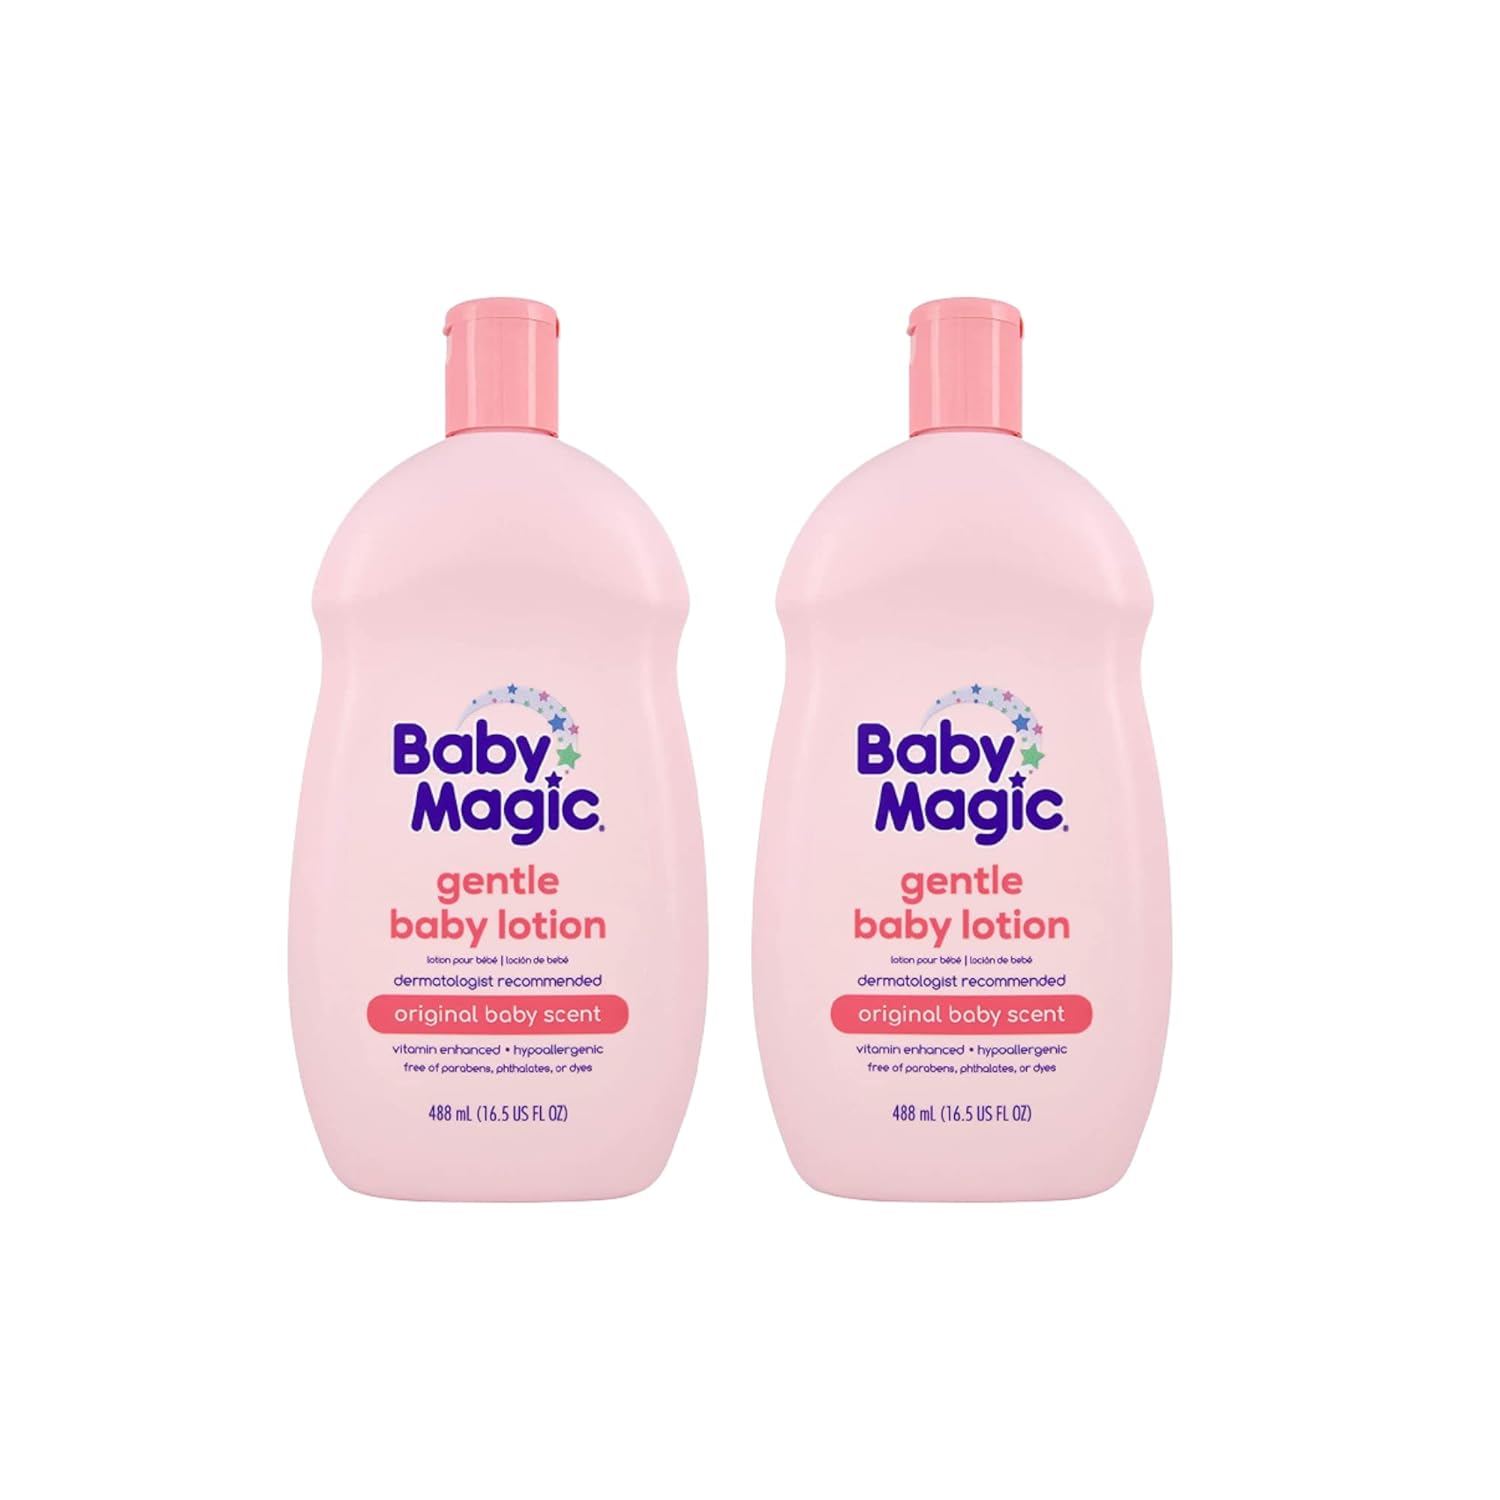 Baby Magic Gentle Lotion with Original Baby Scent, Free of Parabens, Mineral Oil, 16.5 FL Oz (Pack of 2)